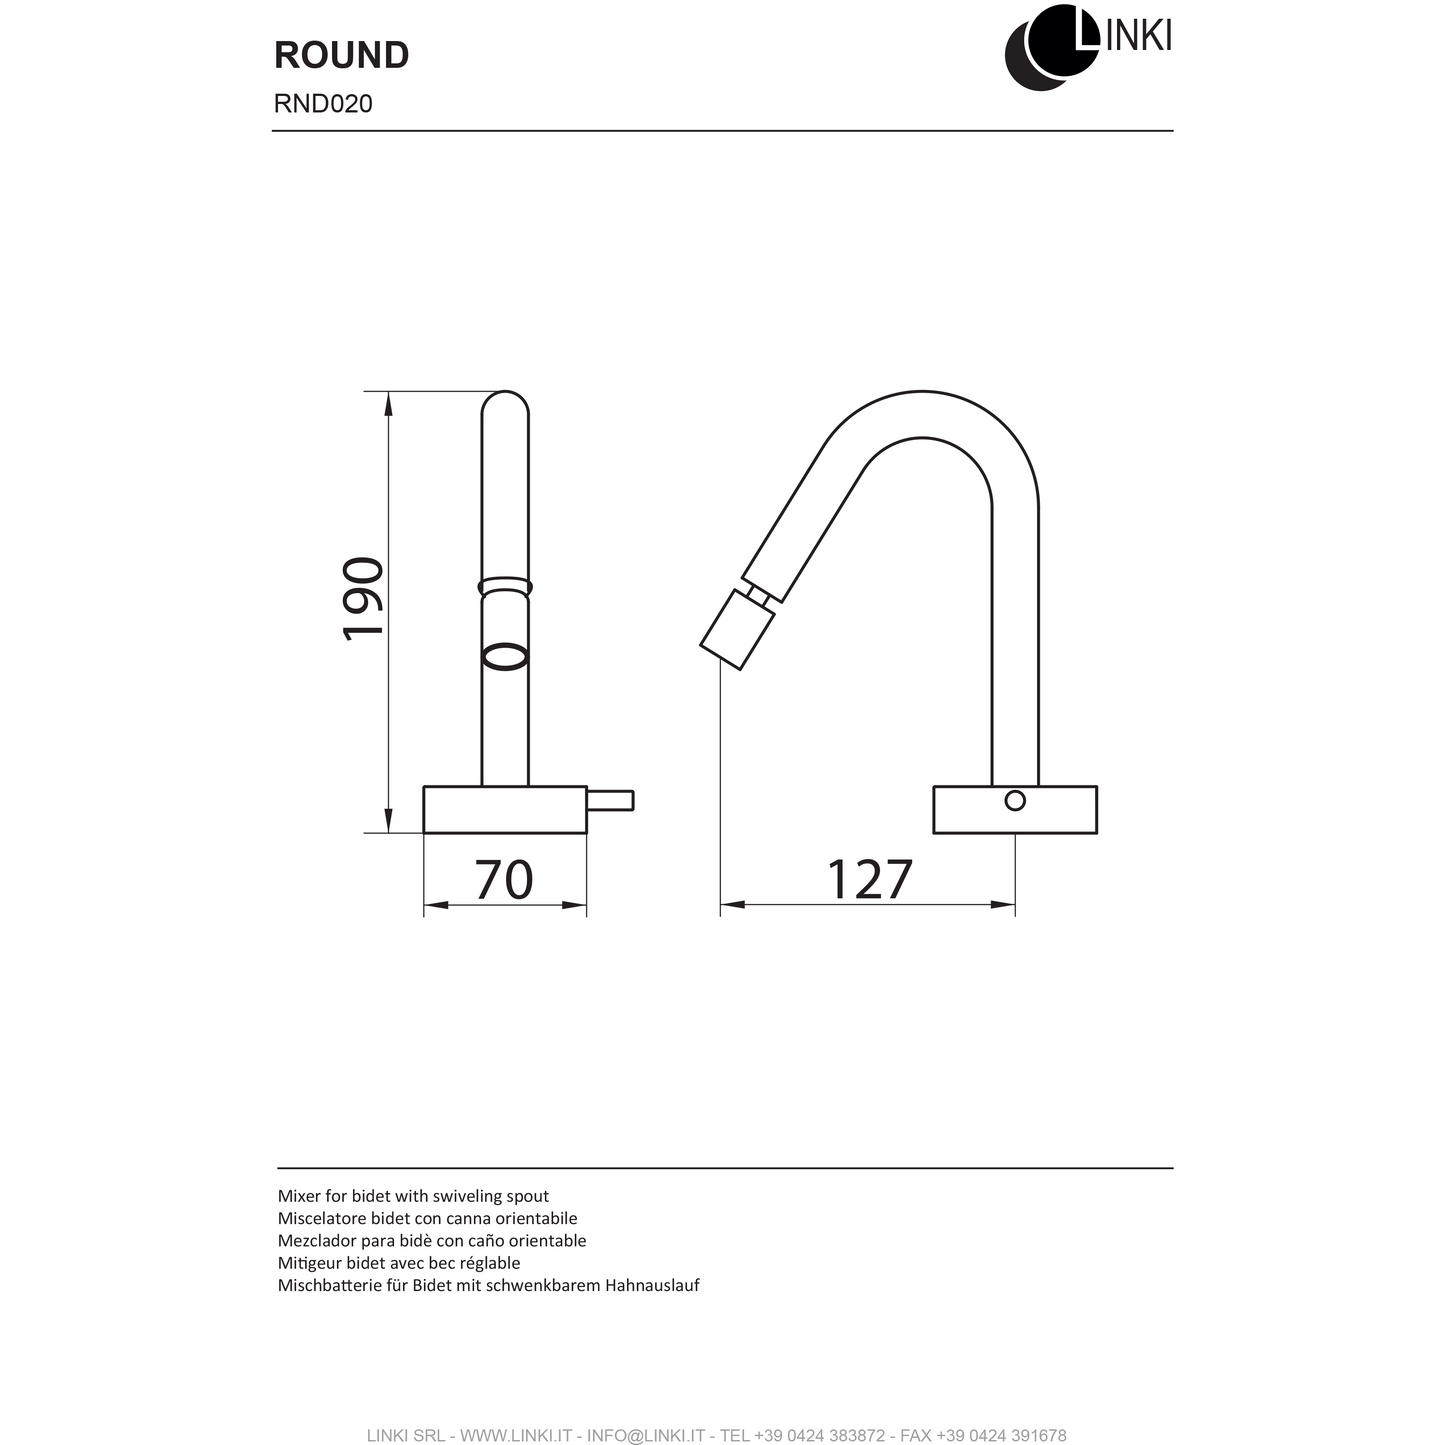 Bidet faucet single hole Round stainless steel RND020